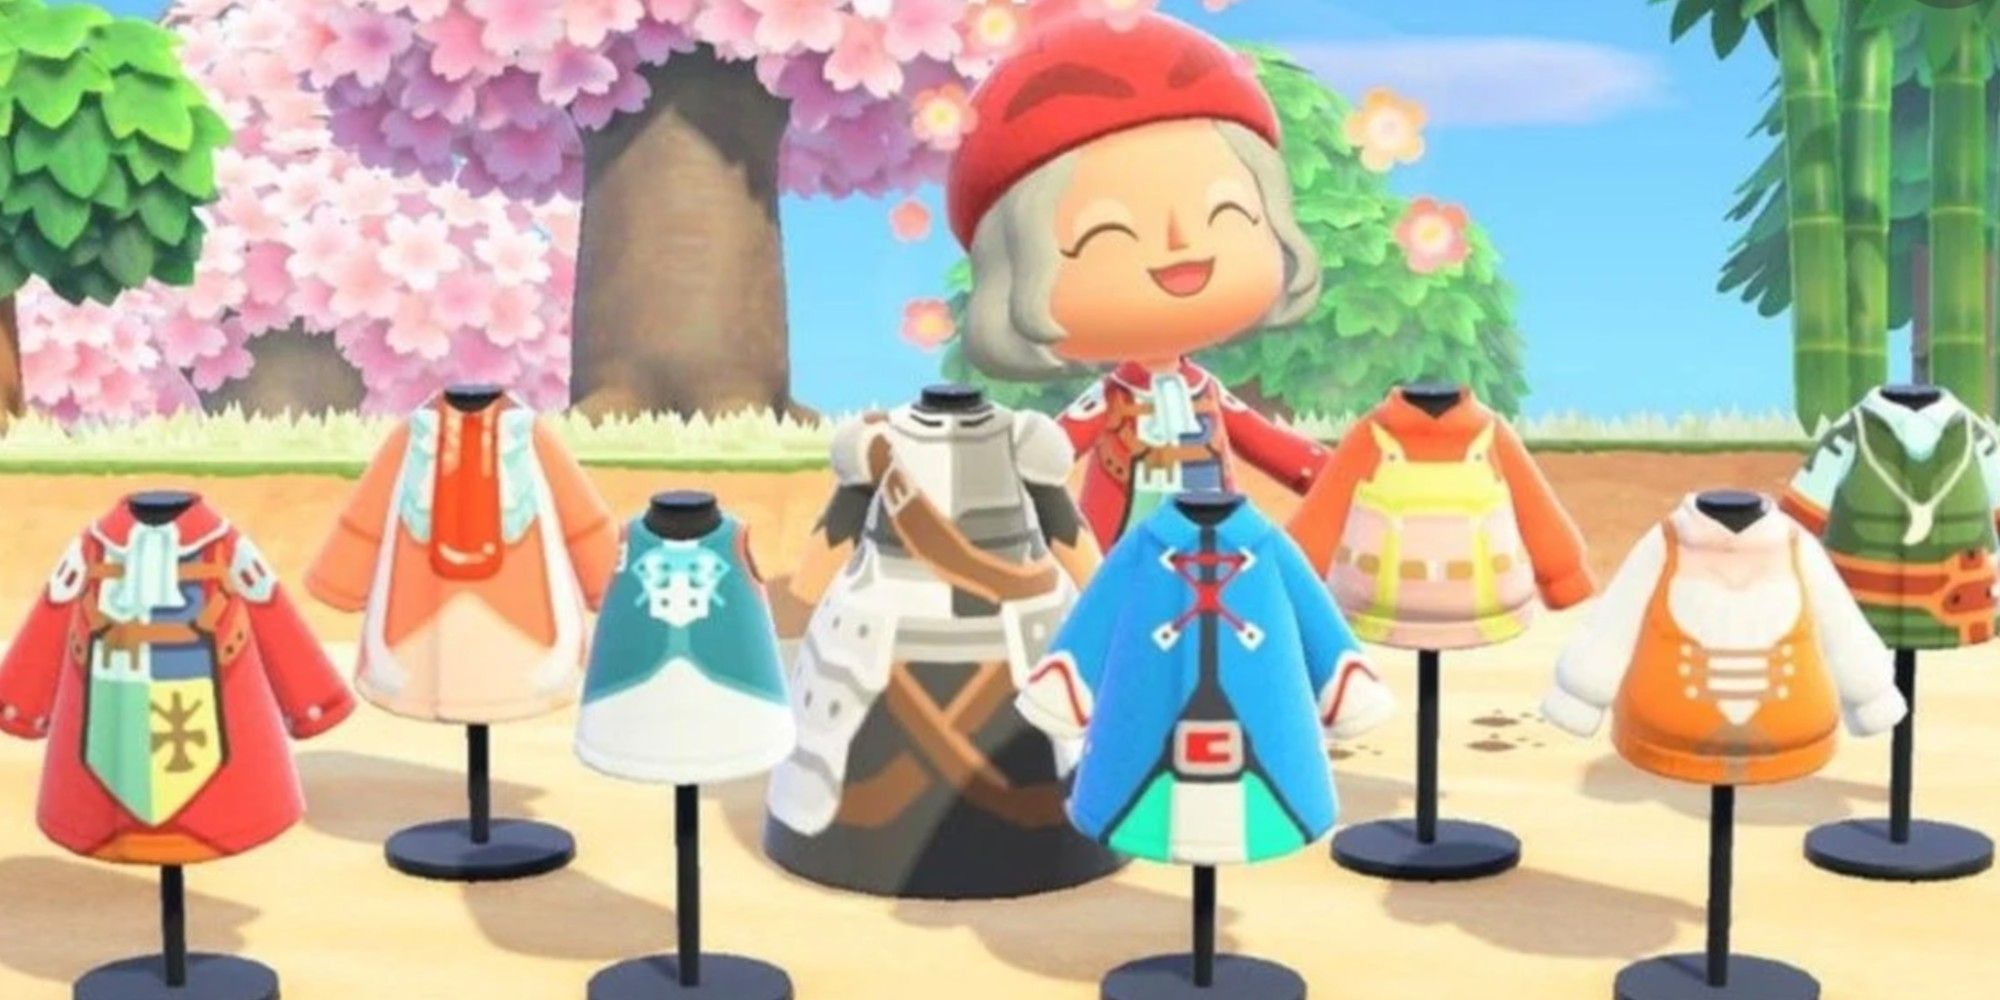 clothing options in animal crossing: new horizons